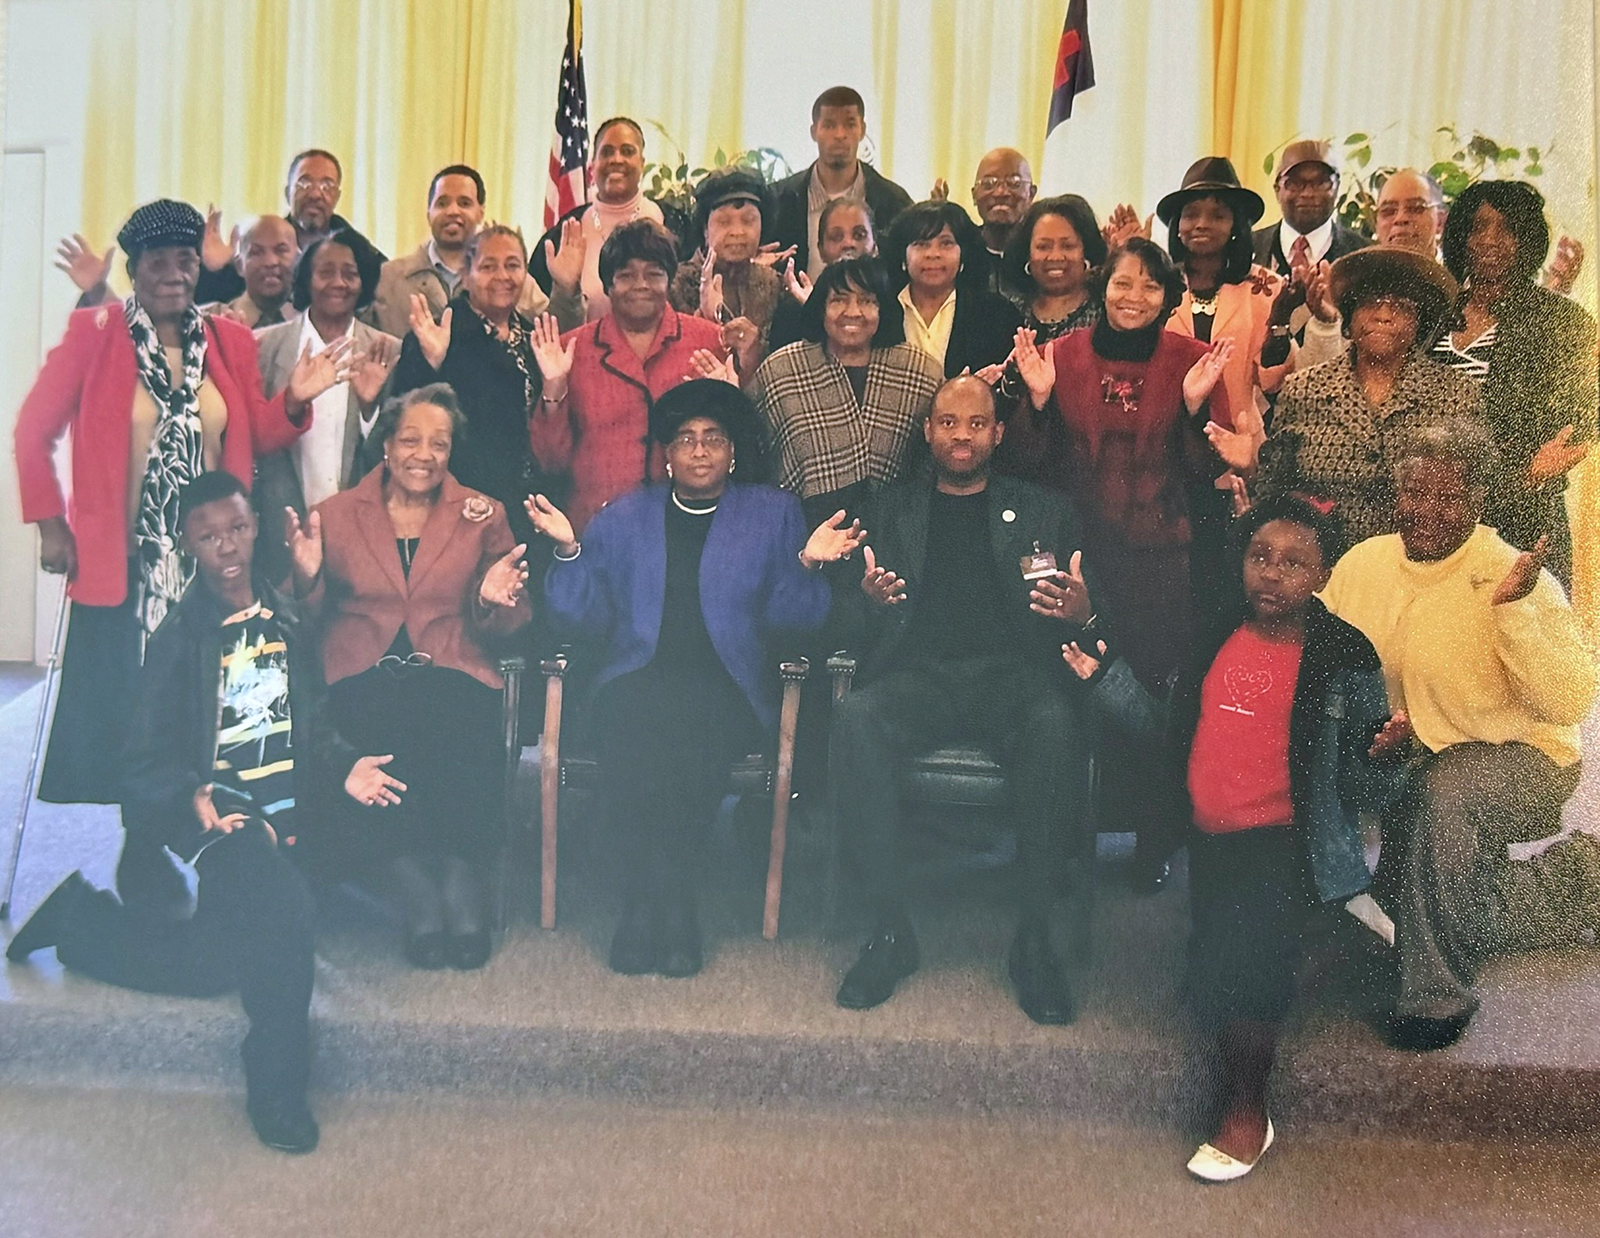 Mother Mary Patterson, seated center, with a Heritage Celebration and Tour in Lexington, Mississippi, in 2008. (Photo courtesy Calvin Robinson)